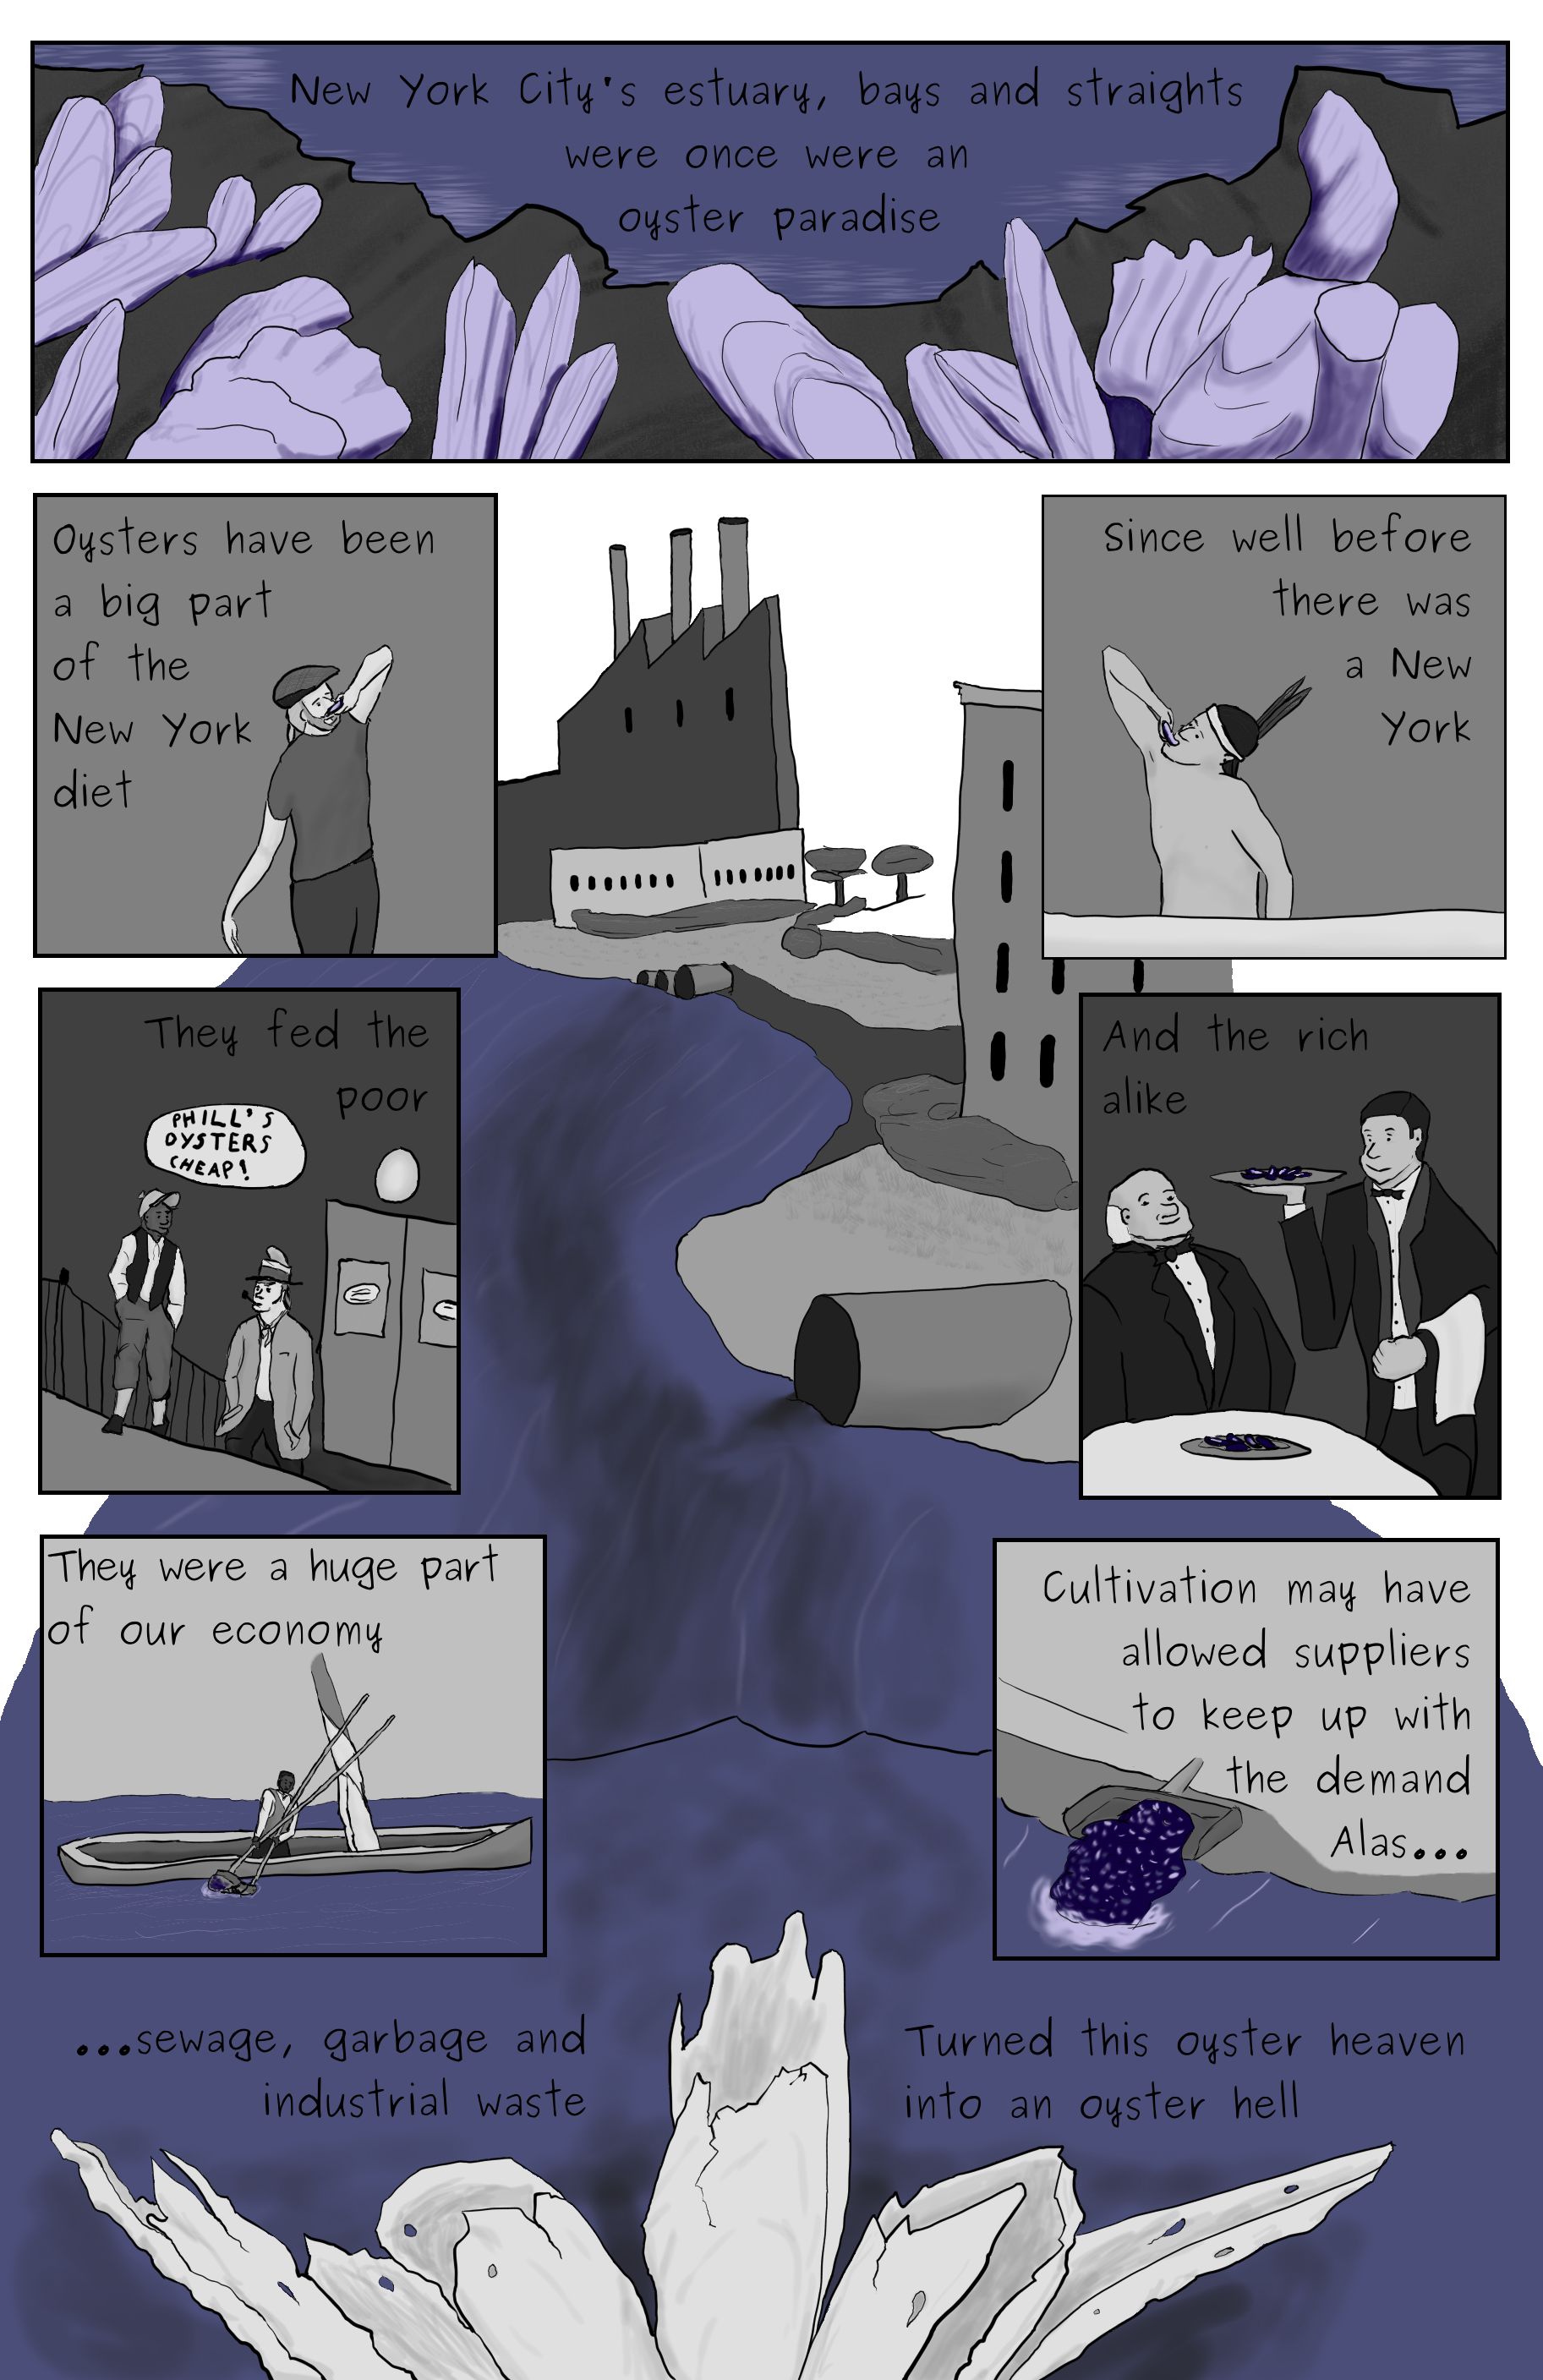 A comic featuring an healthy oyster bed, Phillip Gerba eating an oyster, a leni Lenape eating an oyster, a working class pair leaving a New York oyster cellar, a fancy waiter serving oysters on a silver platter, a person tonging oysters from a boat, a person seeding oysters from a boat, and scene of poluters contamanating a dead oyster bed.